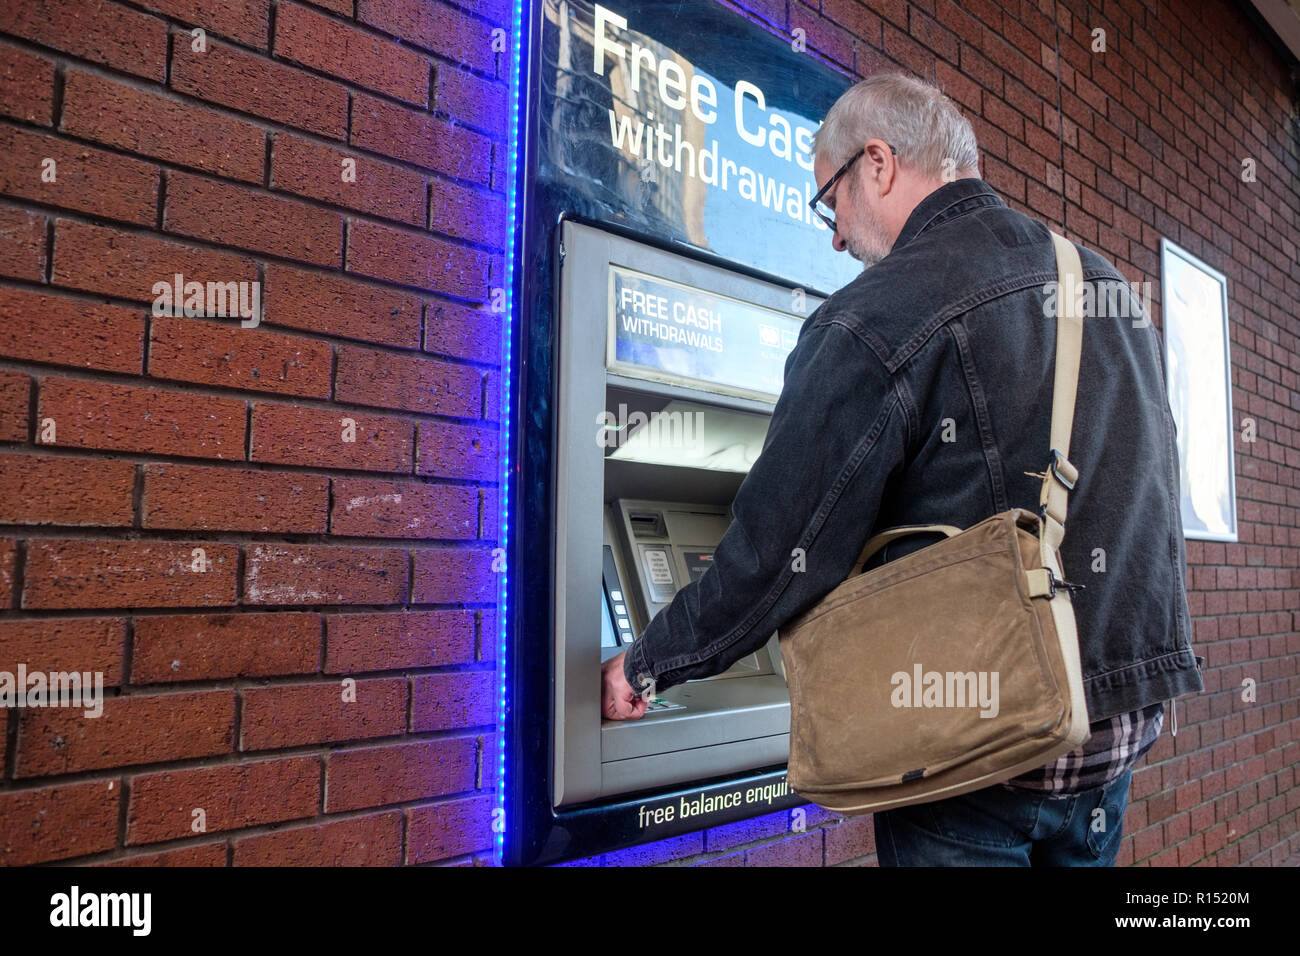 Swedish tourist makes a cash withdrawal in pounds from an ATM machine in Leeds. Stock Photo